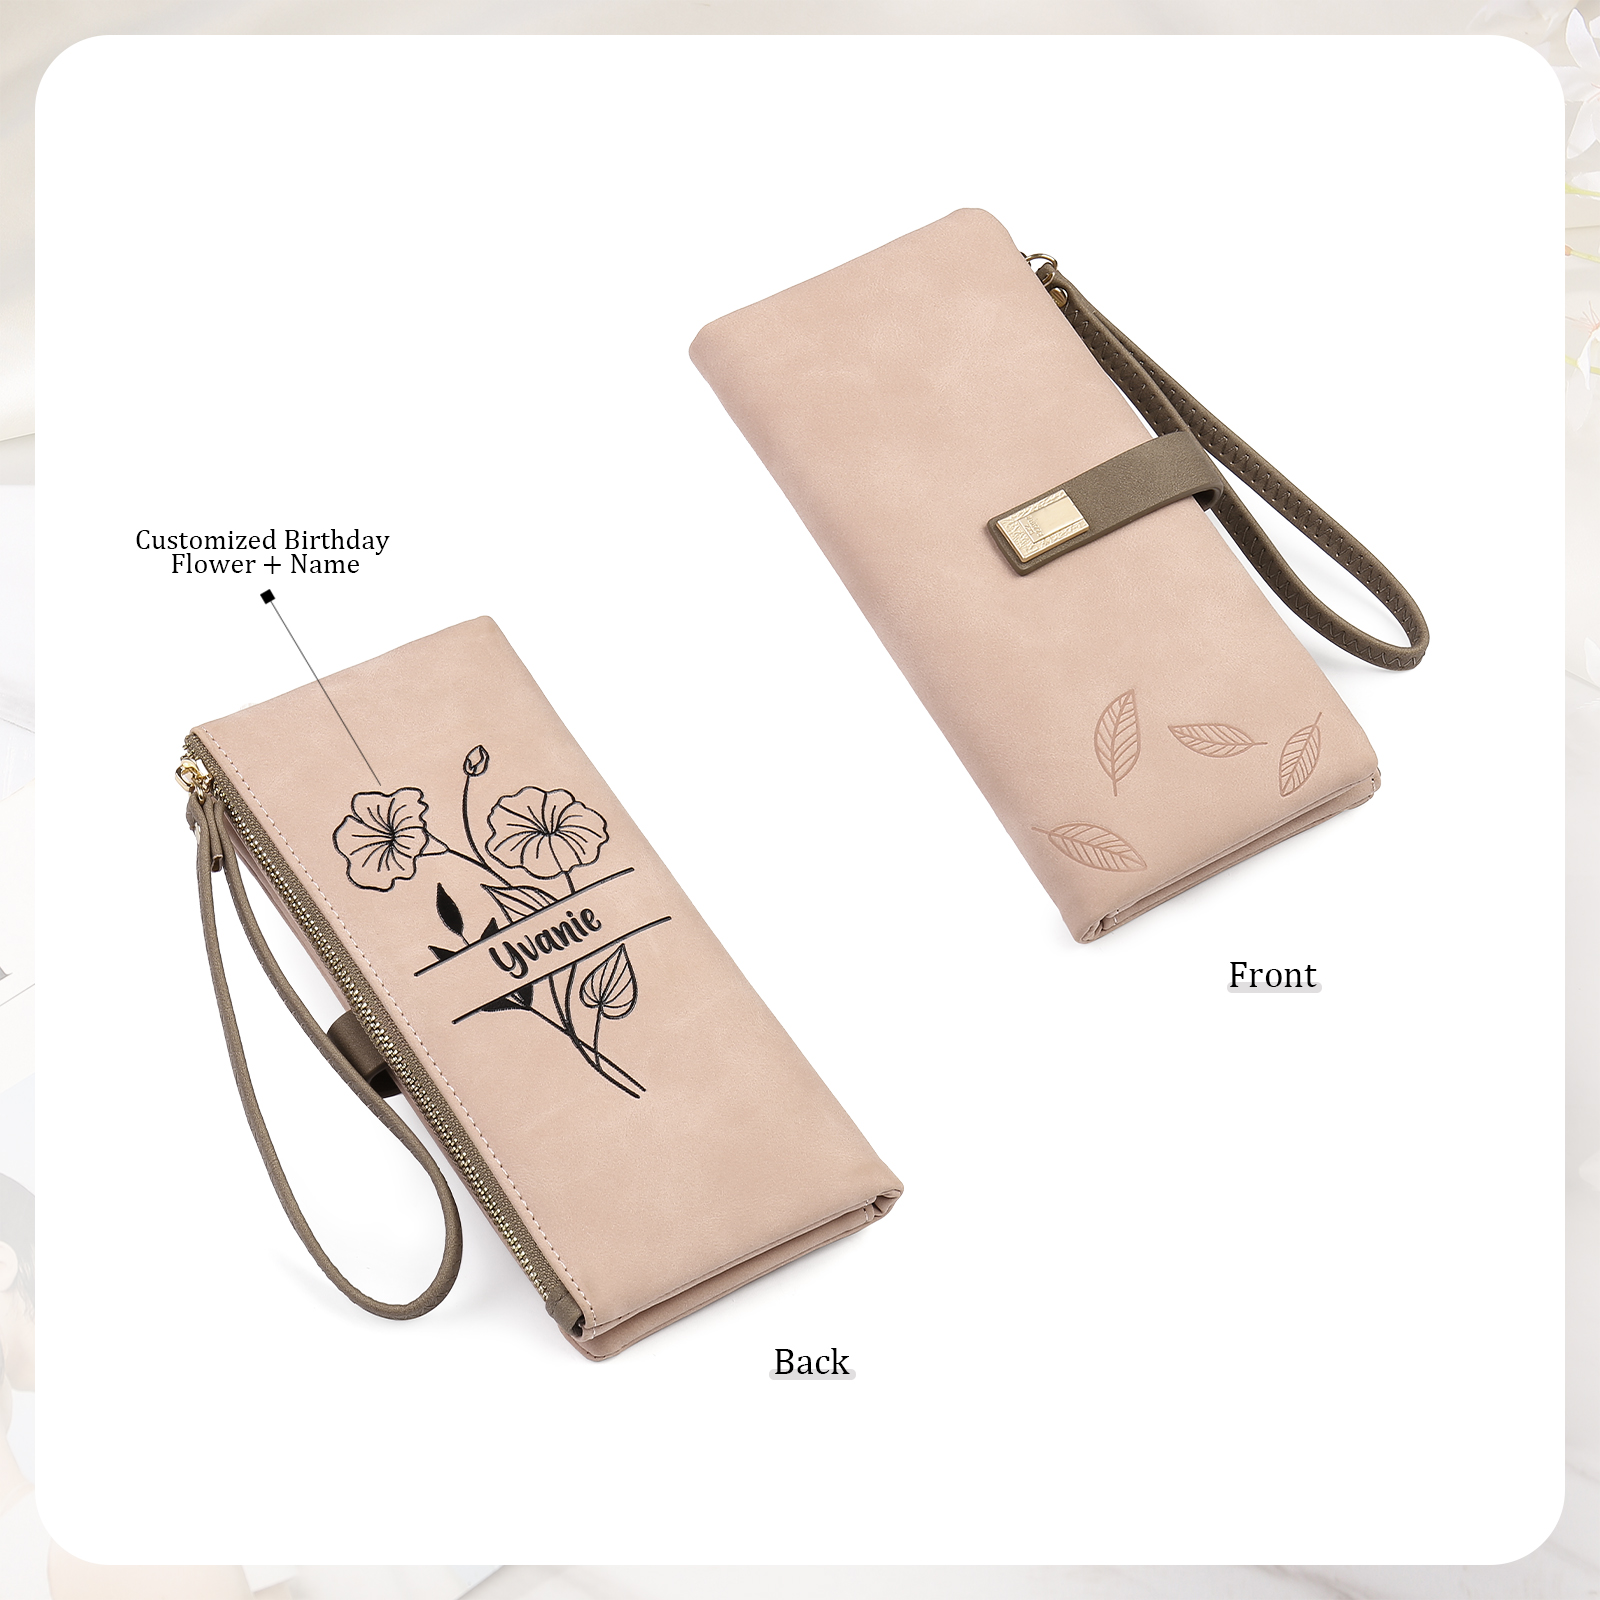 Personalized Women's Wallet Customized Birth Flower and Name Zipper Women's Wallet